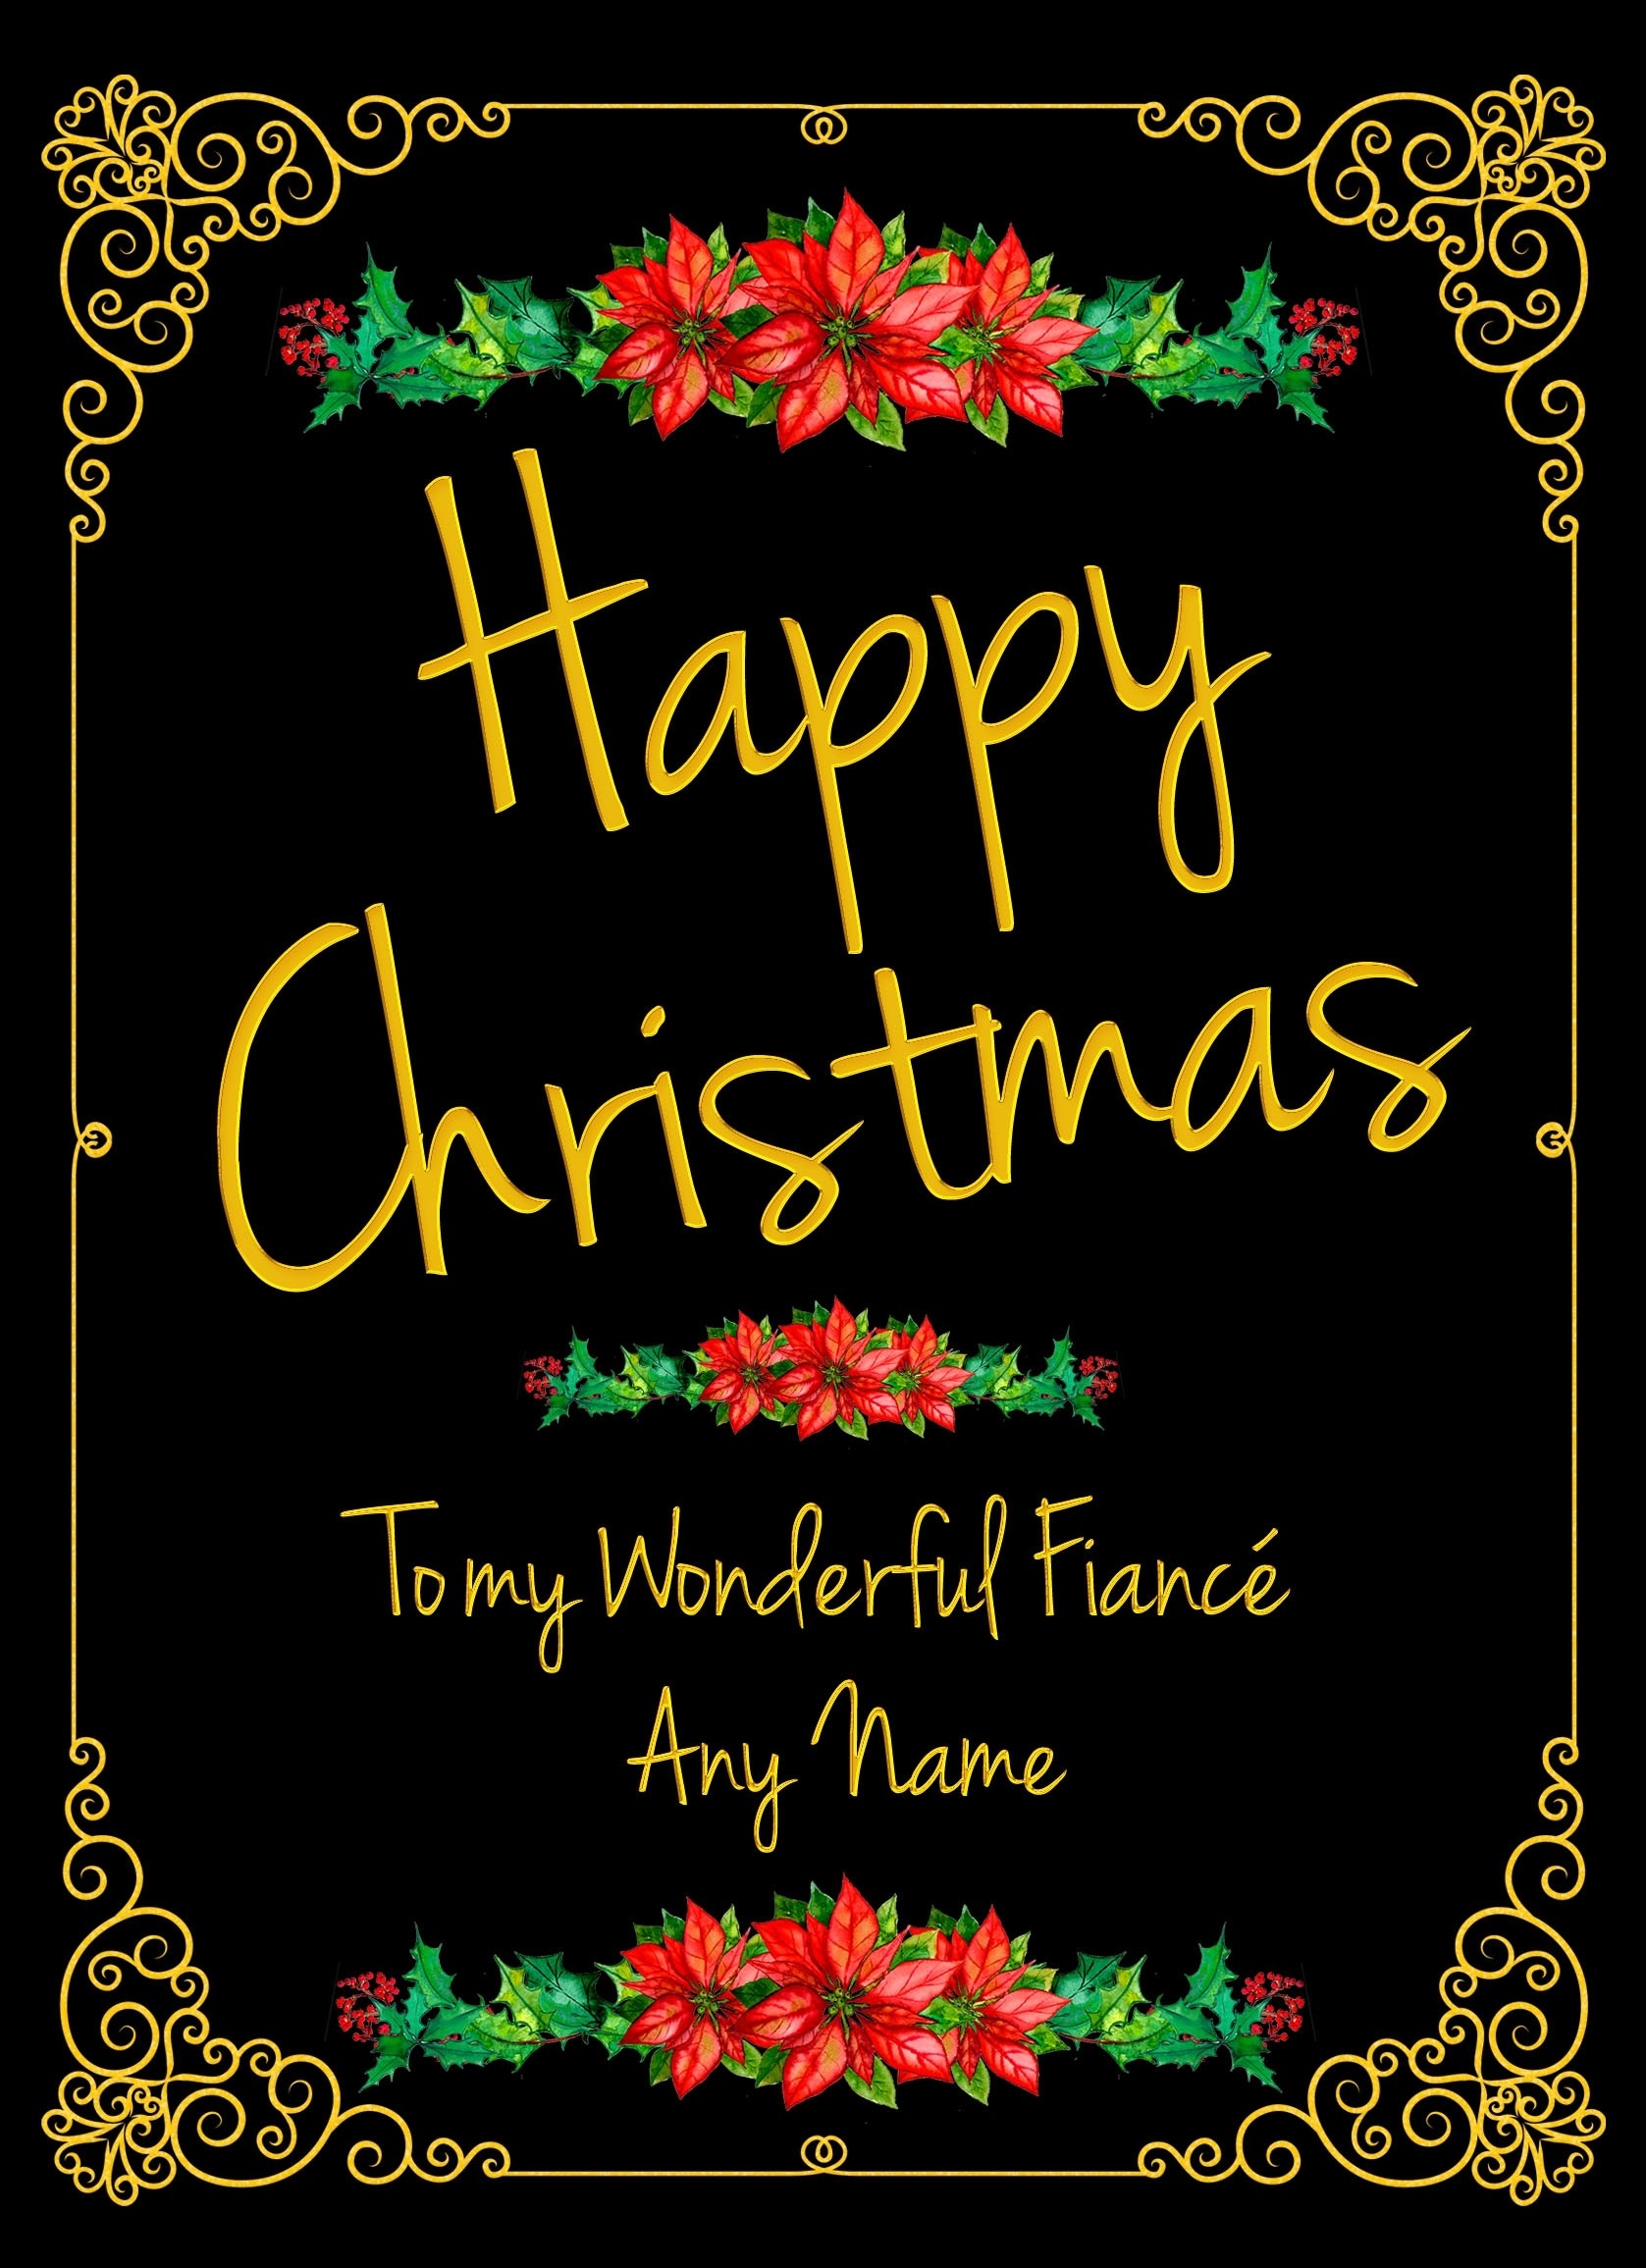 Personalised Christmas Card For Fiance (Wonderful)